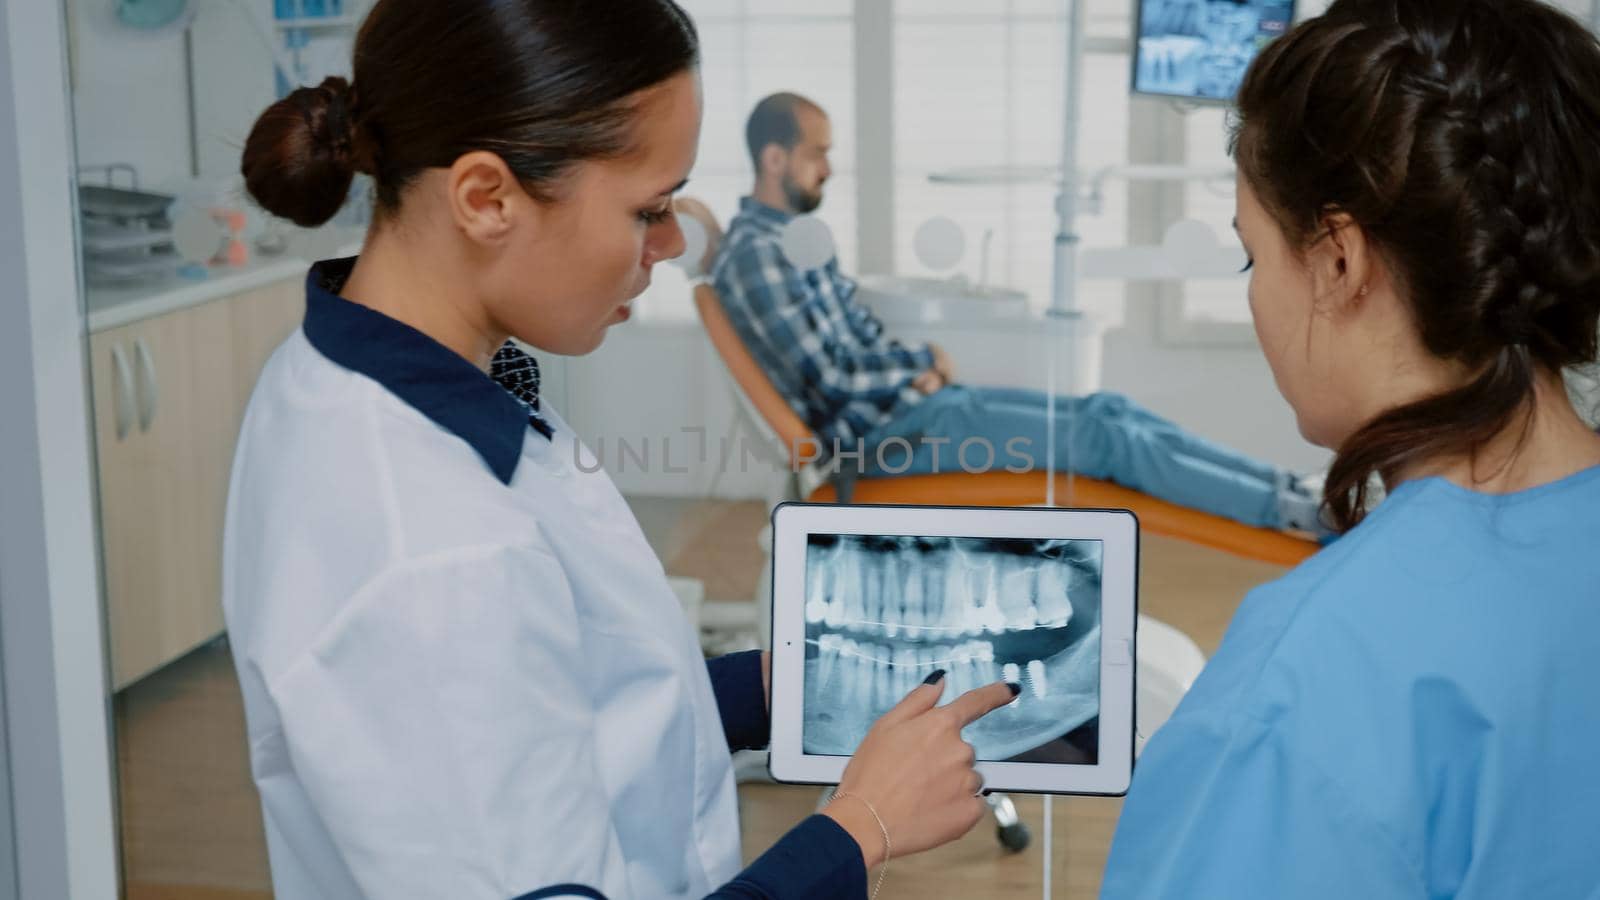 Stomatologist holding modern tablet with x ray on screen by DCStudio